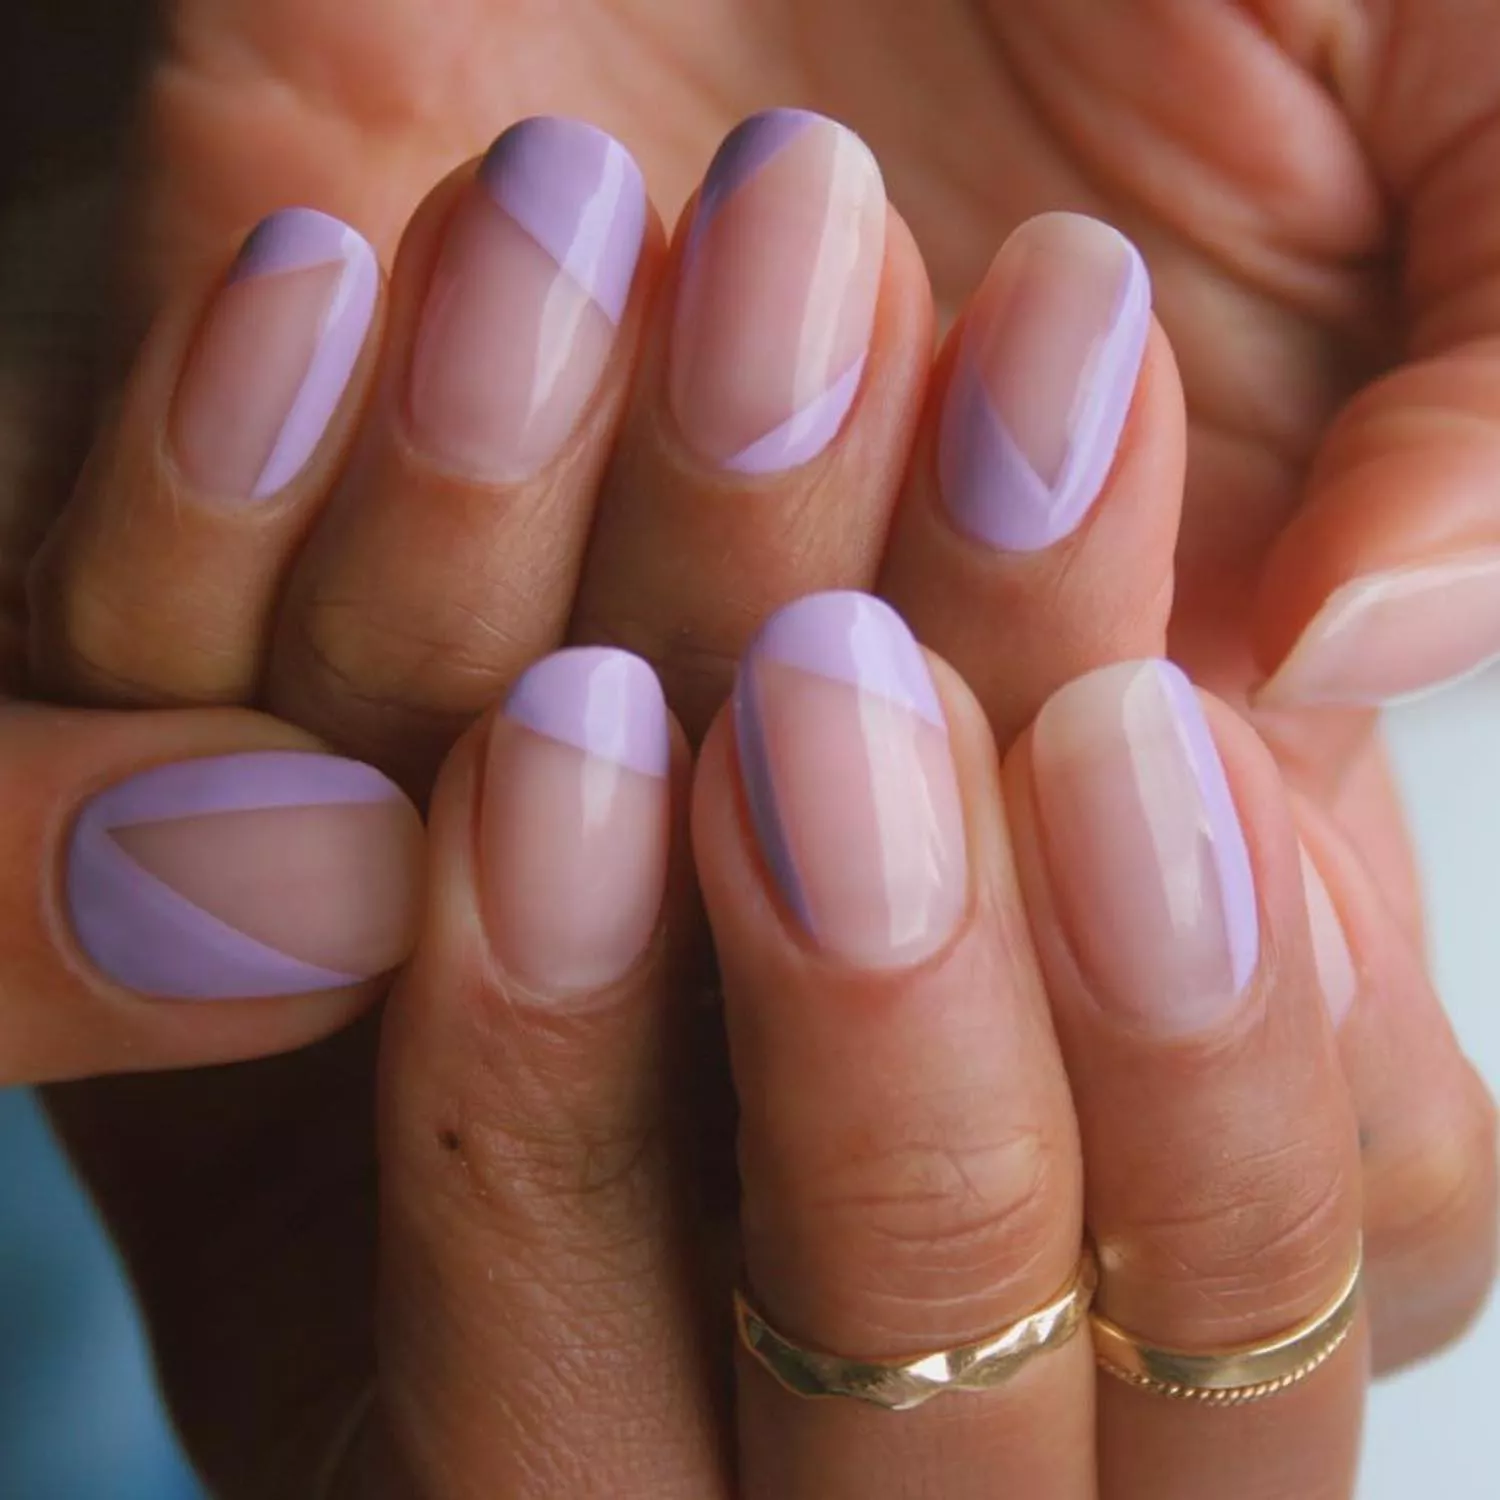 Manicure with neutral translucent base and lavender abstract designs